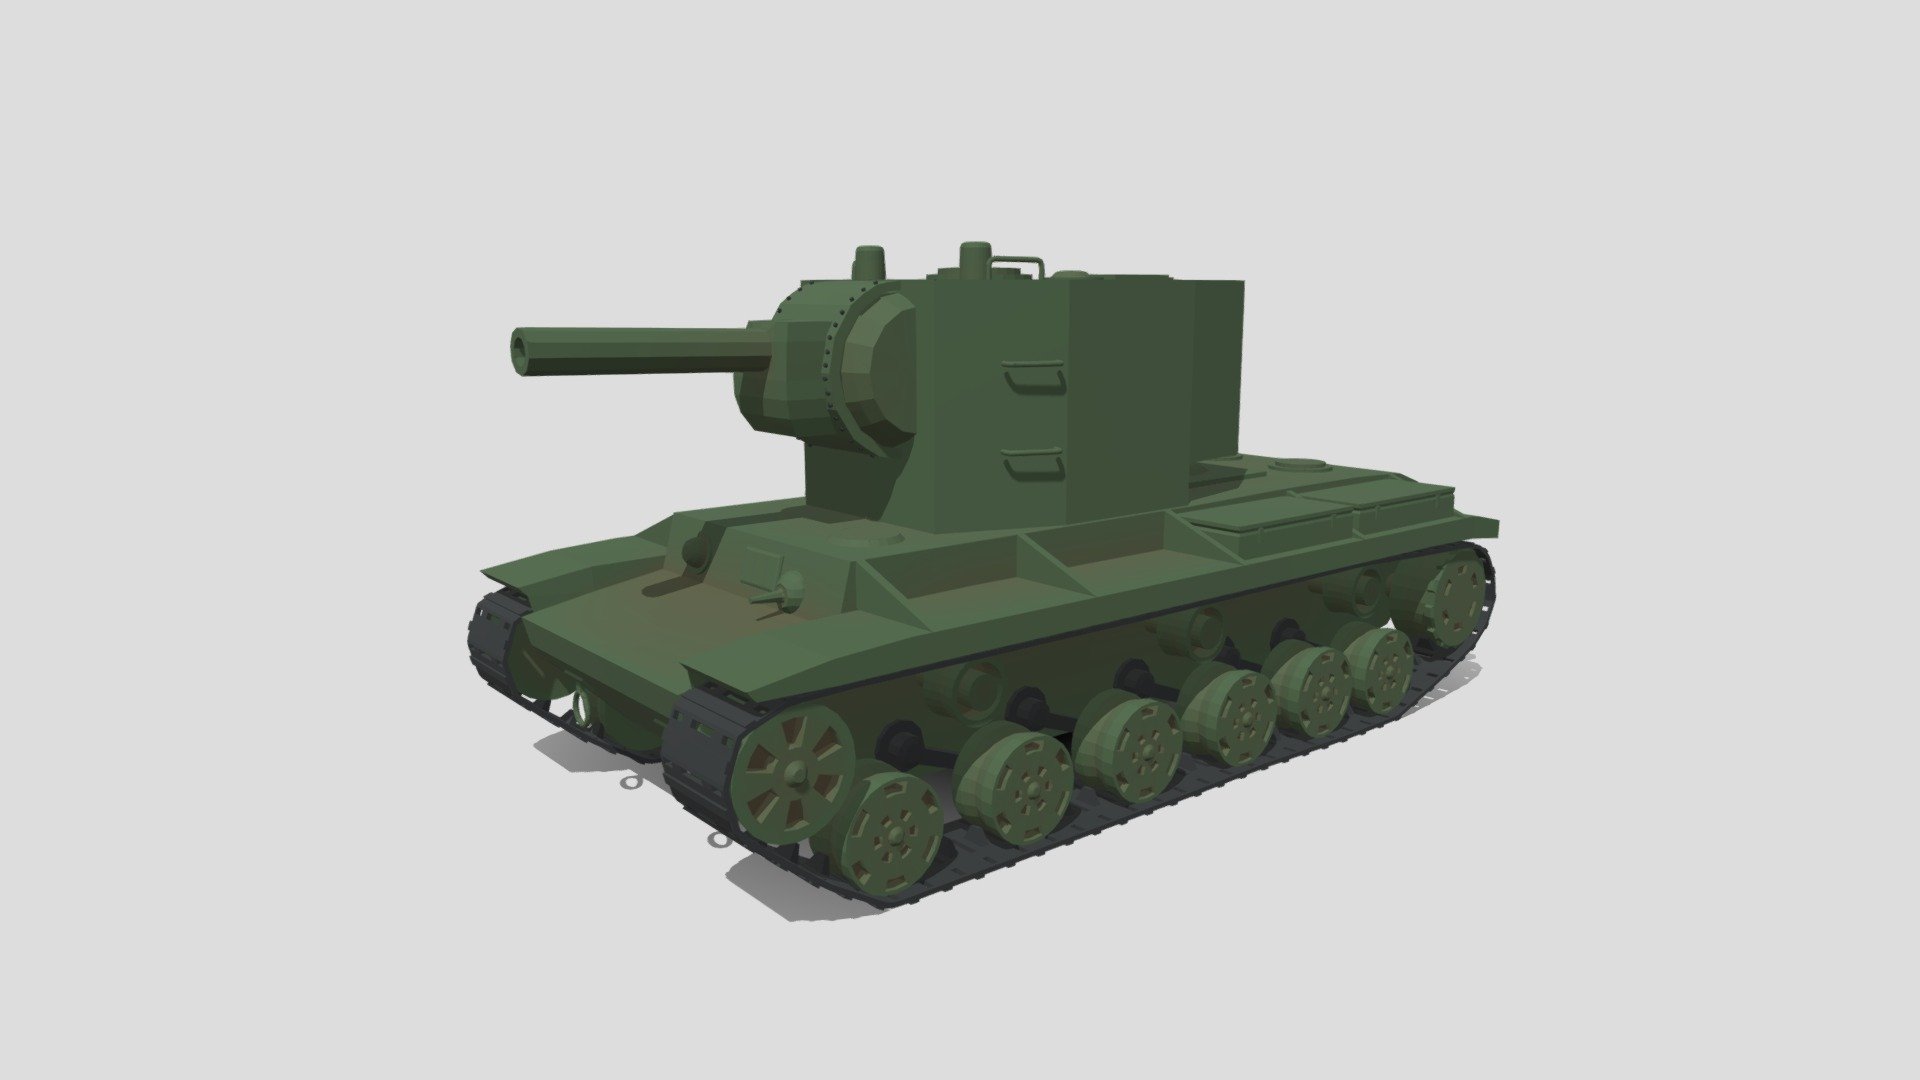 This is a low poly 3d model of a Russian KV-2 tank. The low poly tank was modeled and prepared for low-poly style renderings, background, general CG visualization presented as 1 mesh with quads/tris.

Verts : 26.393 Faces: 27.414.

The 3D model have simple materials with diffuse colors.

No ring, maps and no UVW mapping is available.

The original file was created in blender. You will receive a 3DS, OBJ, FBX, blend, DAE, Stl.

All preview images were rendered with Blender Cycles. Product is ready to render out-of-the-box. Please note that the lights, cameras, and background is only included in the .blend file. The model is clean and alone in the other provided files, centered at origin and has real-world scale 3d model